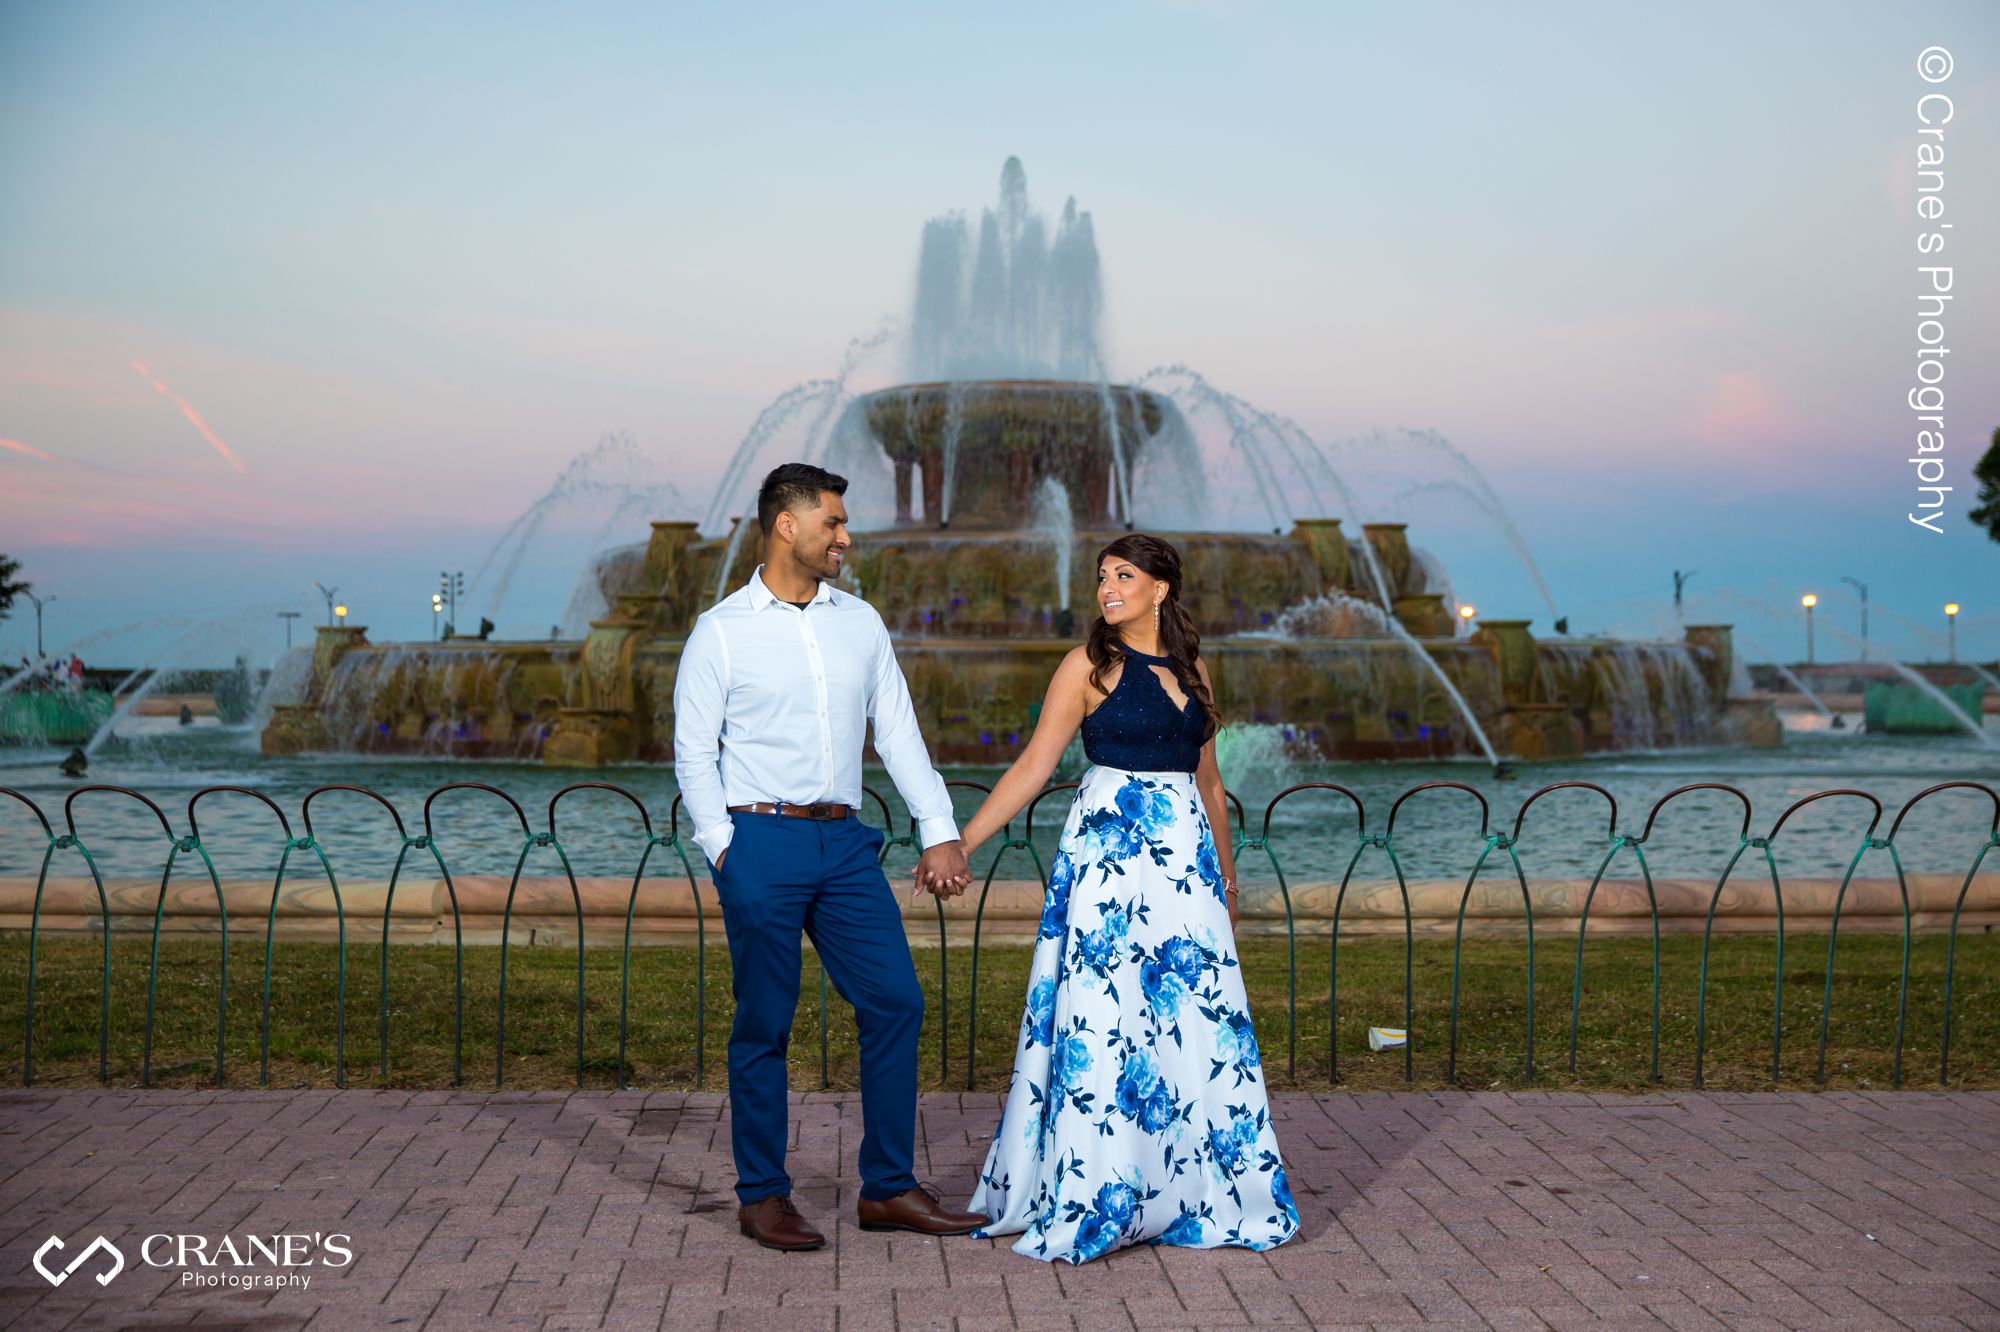 A sunset engagement photo at the Buckingham Fountain